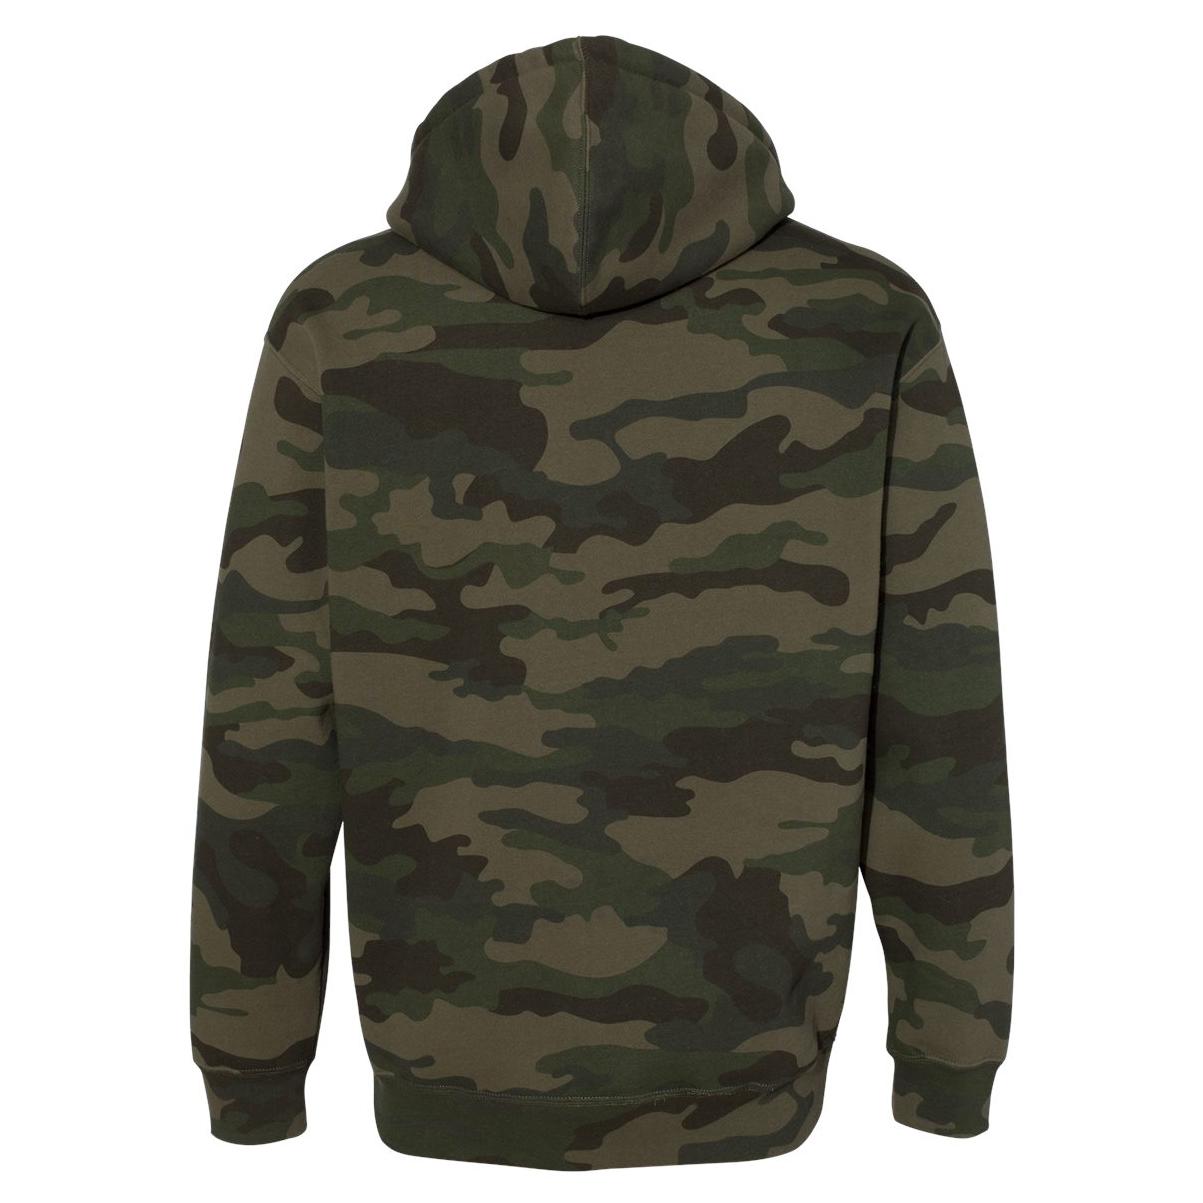  Independent Unisex Lightweight Full-Zip Hooded Sweatshirt XS  Forest Camo: 0846798183545: Clothing, Shoes & Jewelry